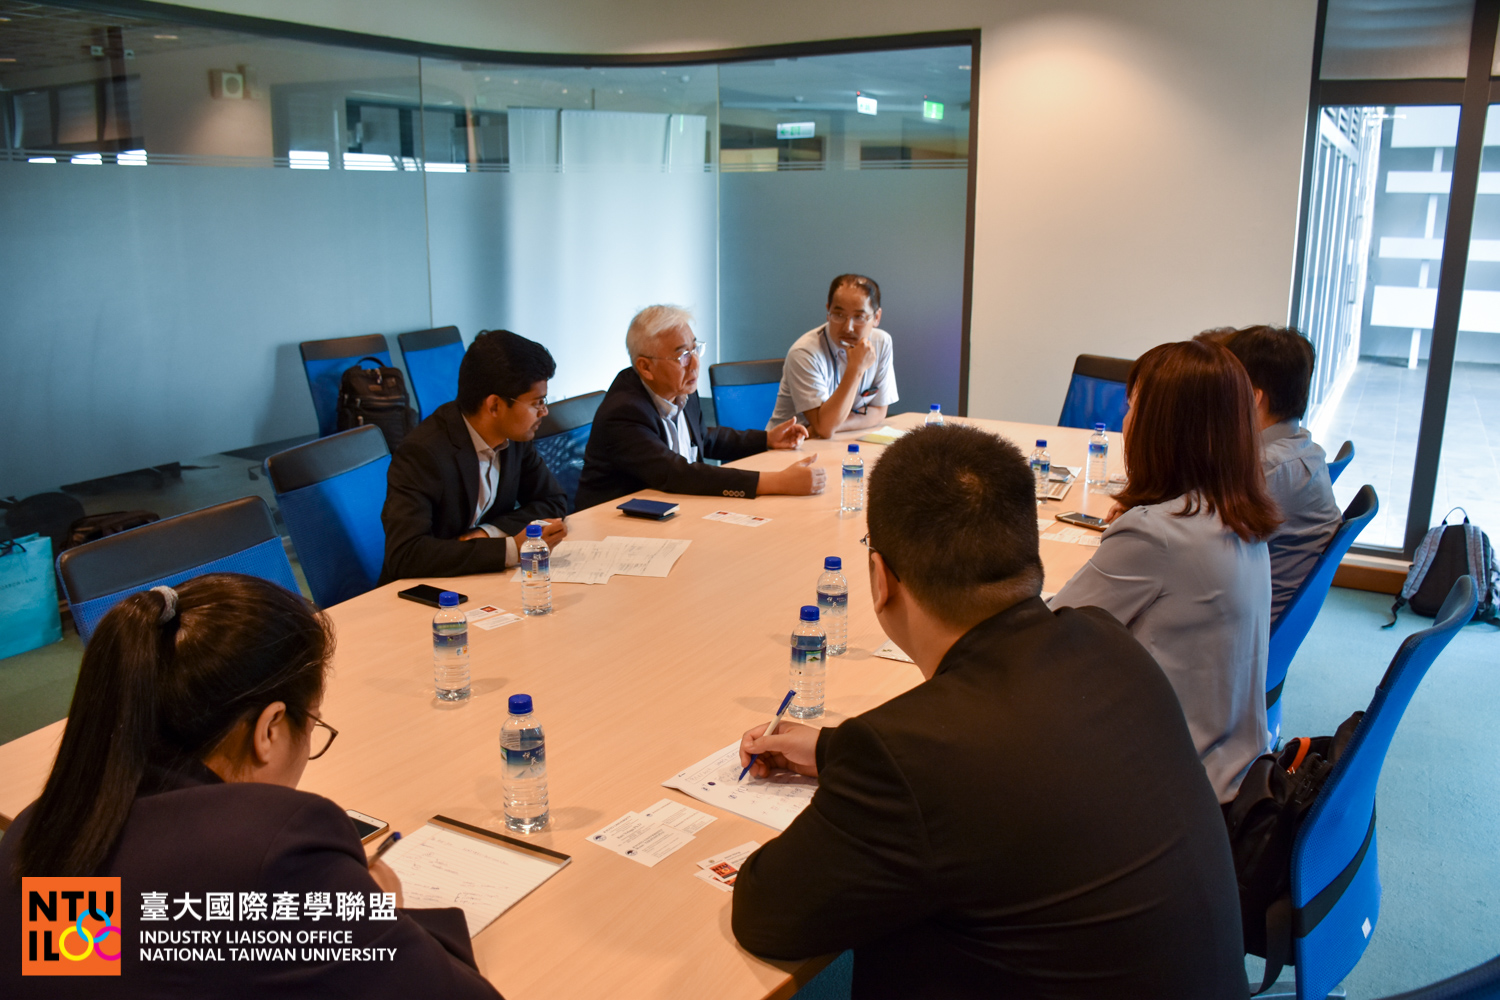 Kyoto University’s Office of Society-Academia Collaboration for Innovation visited National Taiwan University on September 19th